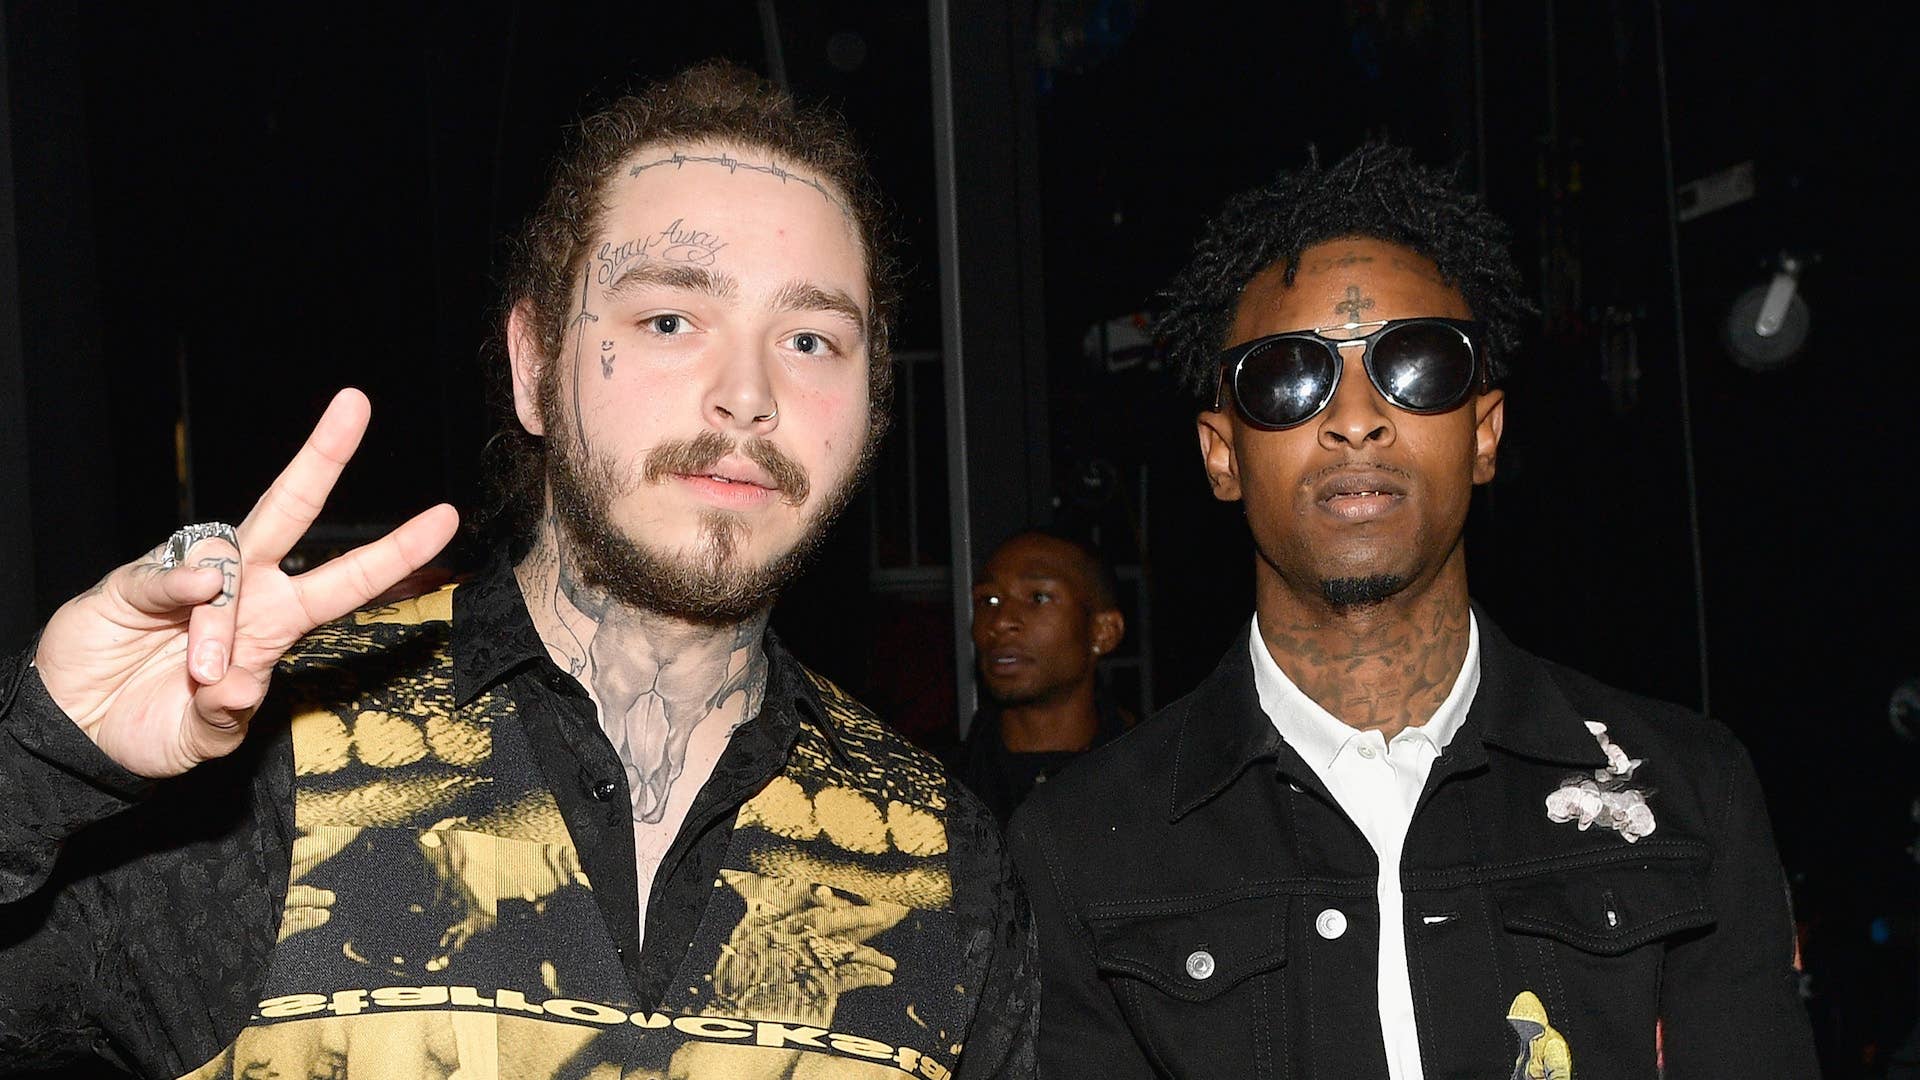 6 years ago today, Post Malone released 'Rockstar' feat 21 savage ⚡ The  song reached #1 on Billboard Hot 100 (8 weeks), hit 2.7 billion streams on  Spotify , 1,1 billion views